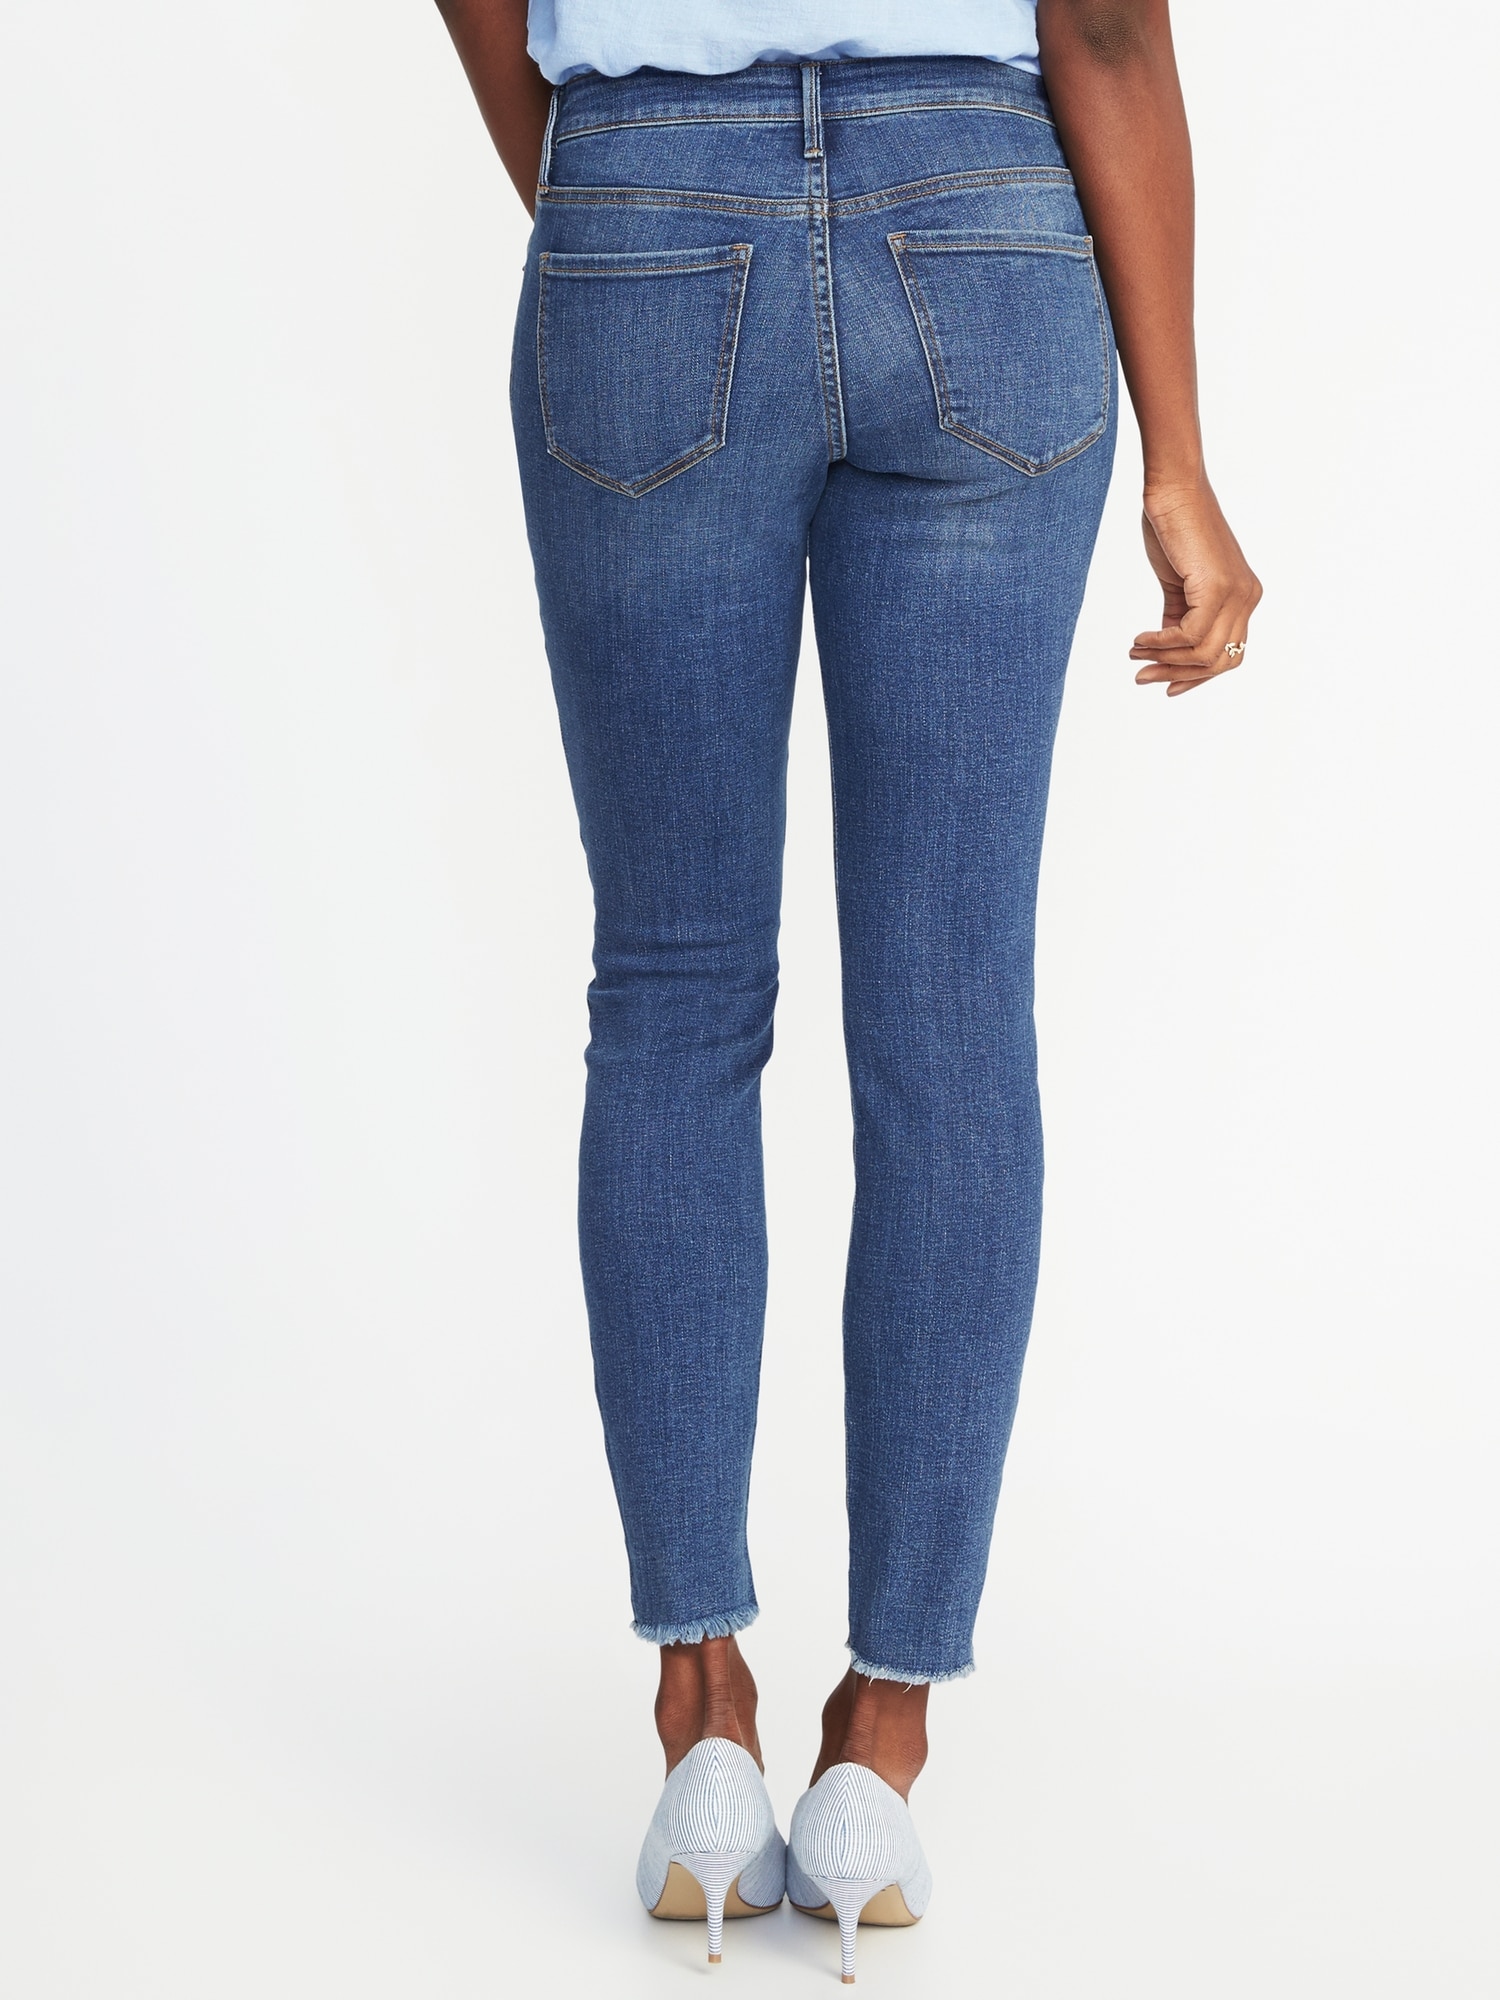 Mid-Rise Rockstar Raw-Edge Ankle Jeans for Women | Old Navy